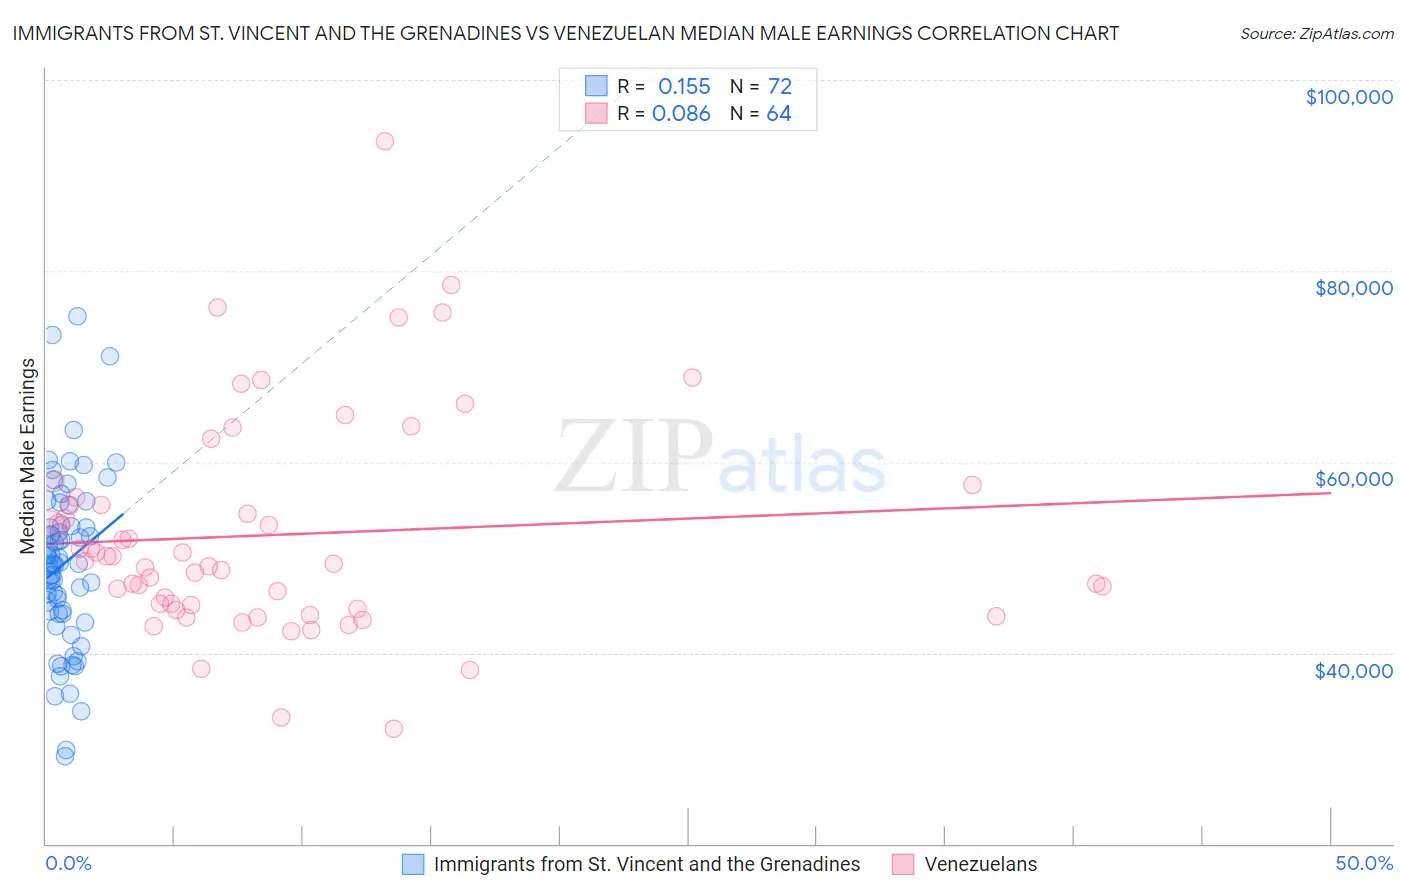 Immigrants from St. Vincent and the Grenadines vs Venezuelan Median Male Earnings